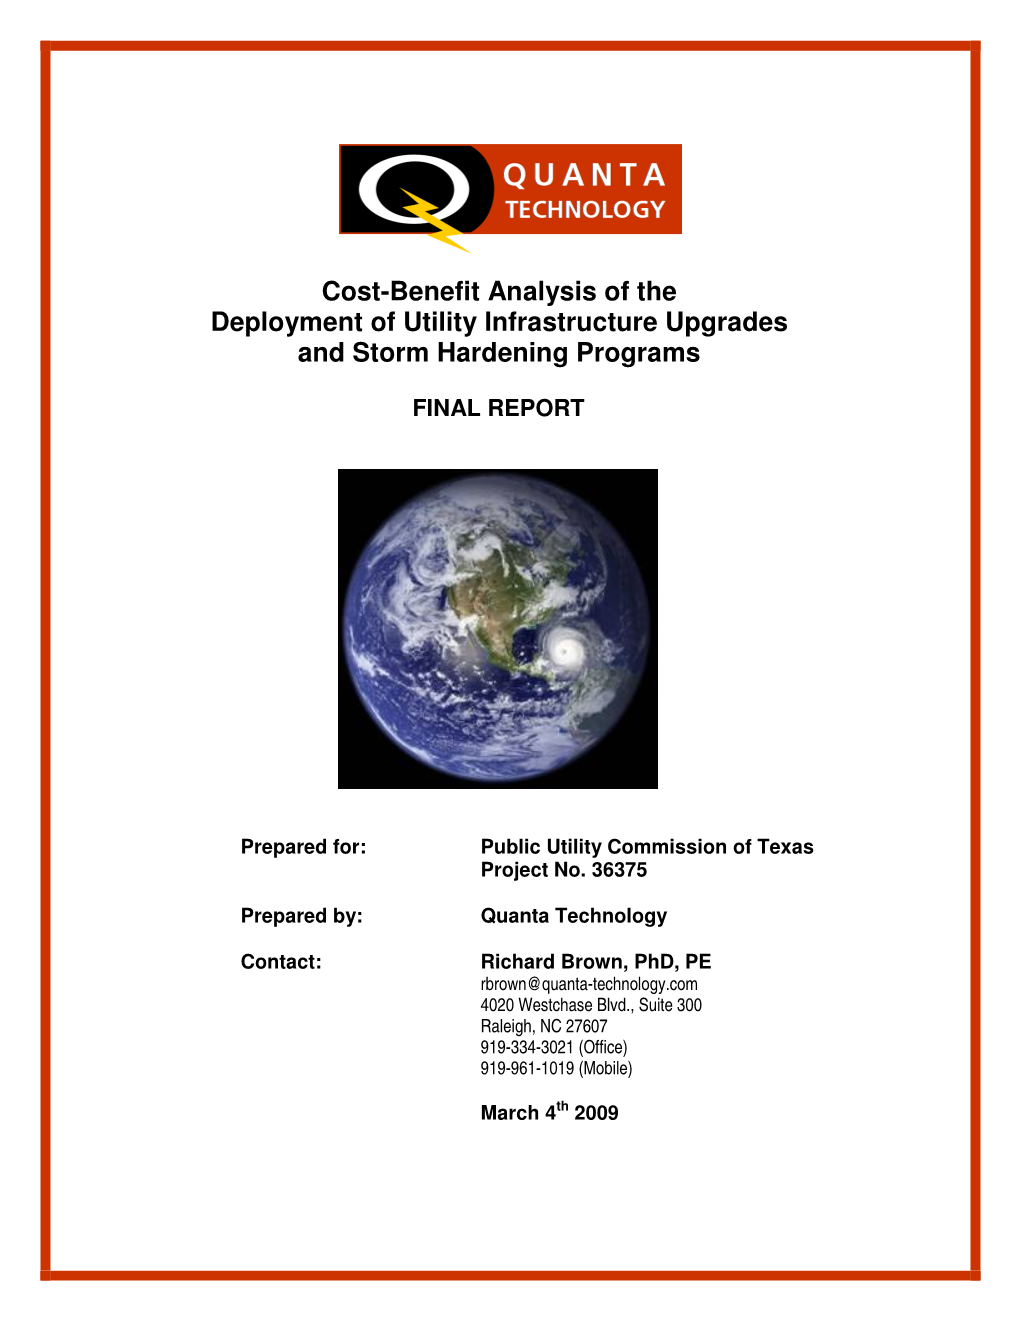 Cost-Benefit Analysis of the Deployment of Utility Infrastructure Upgrades and Storm Hardening Programs